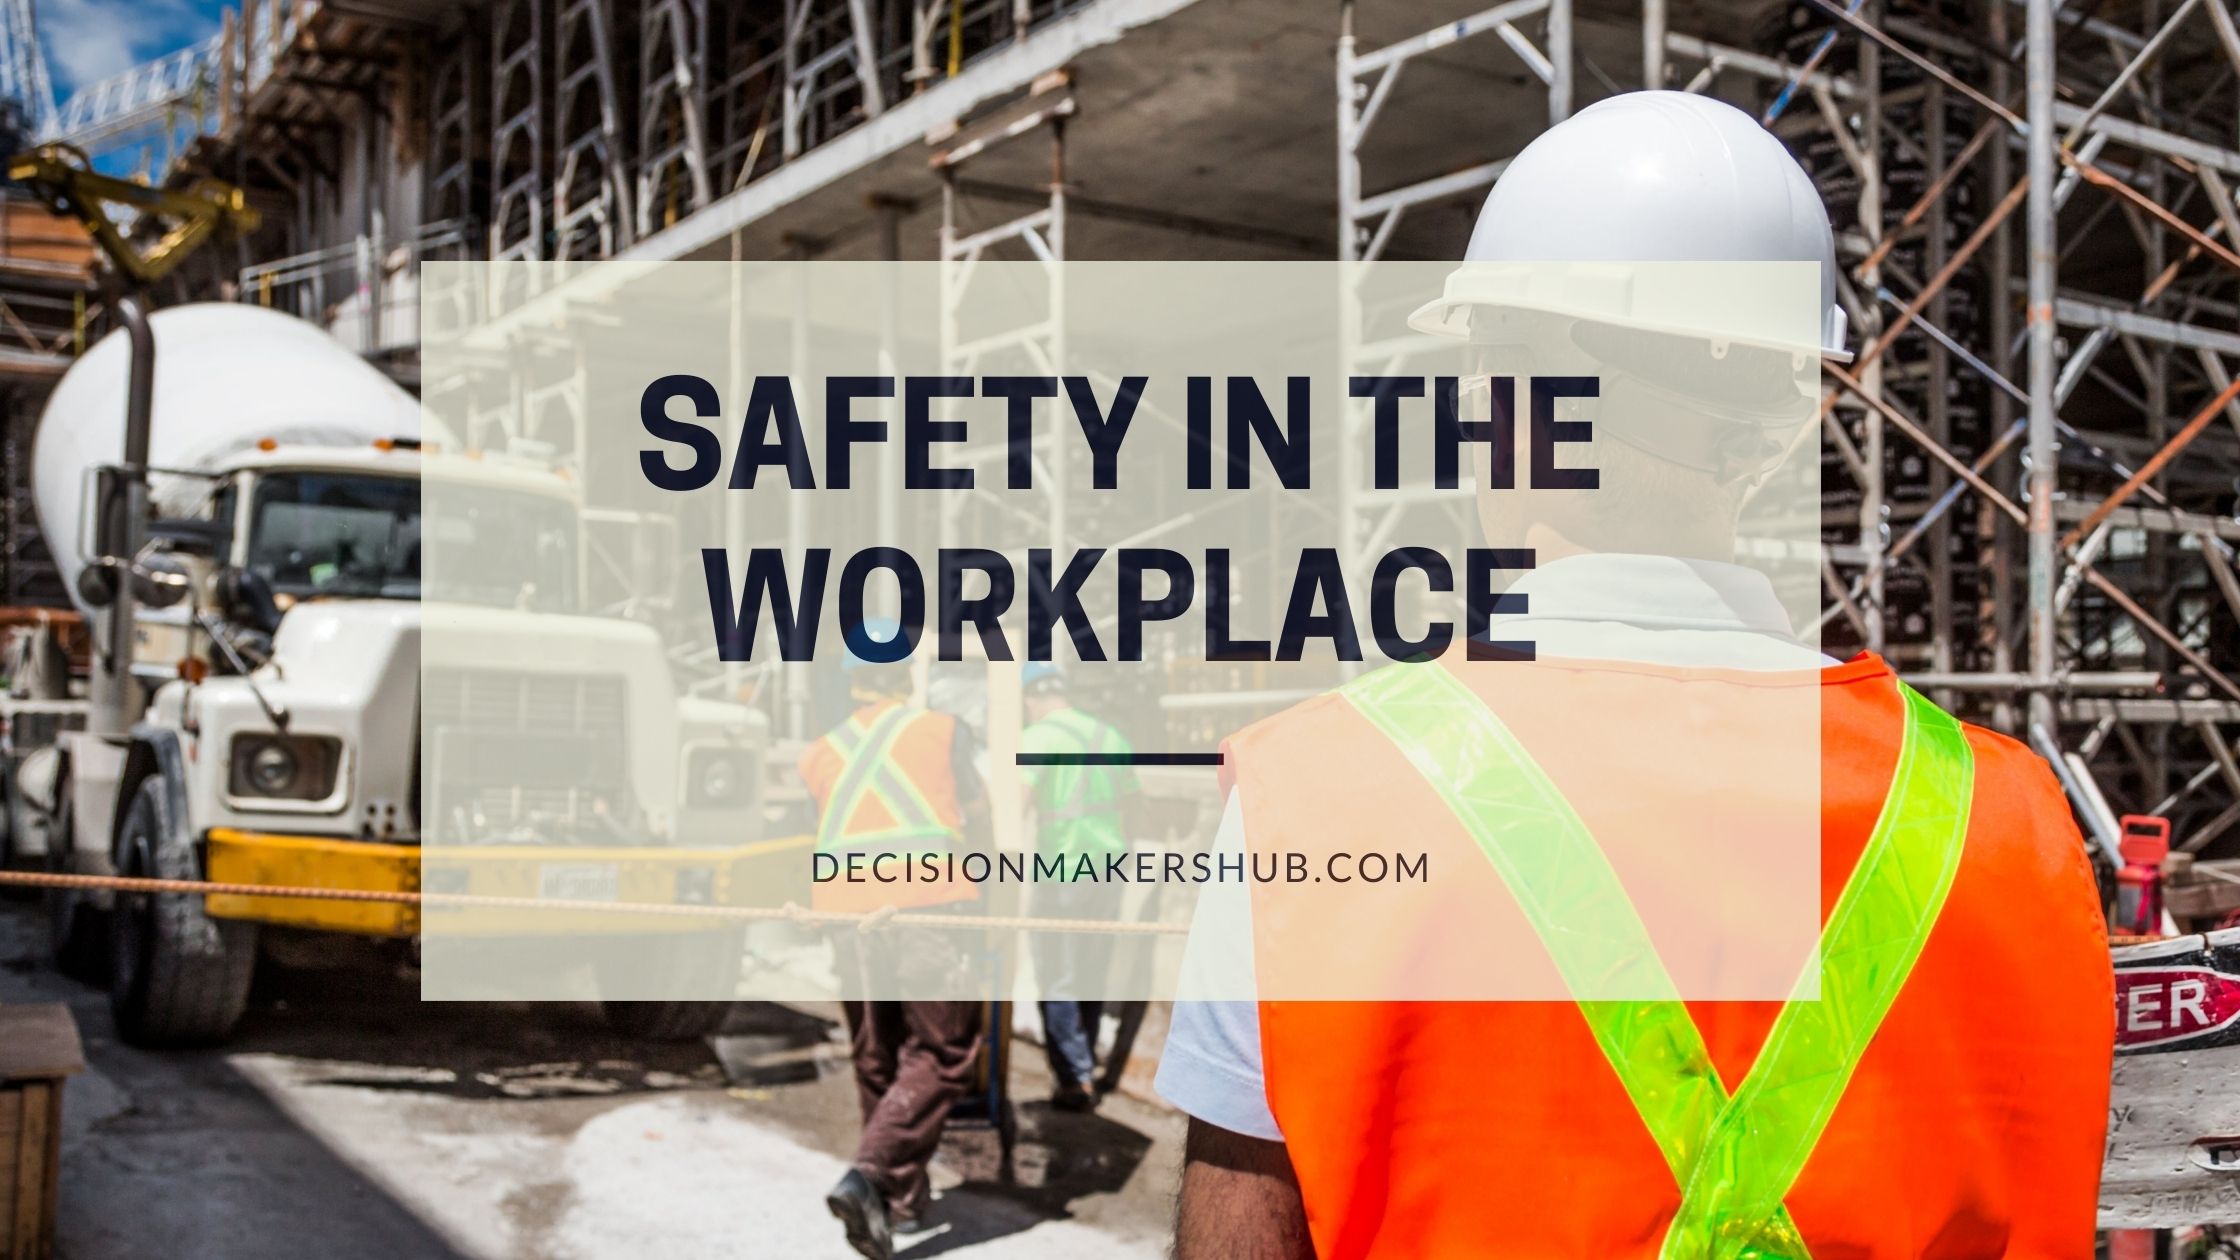 How do you ensure safety in the workplace?